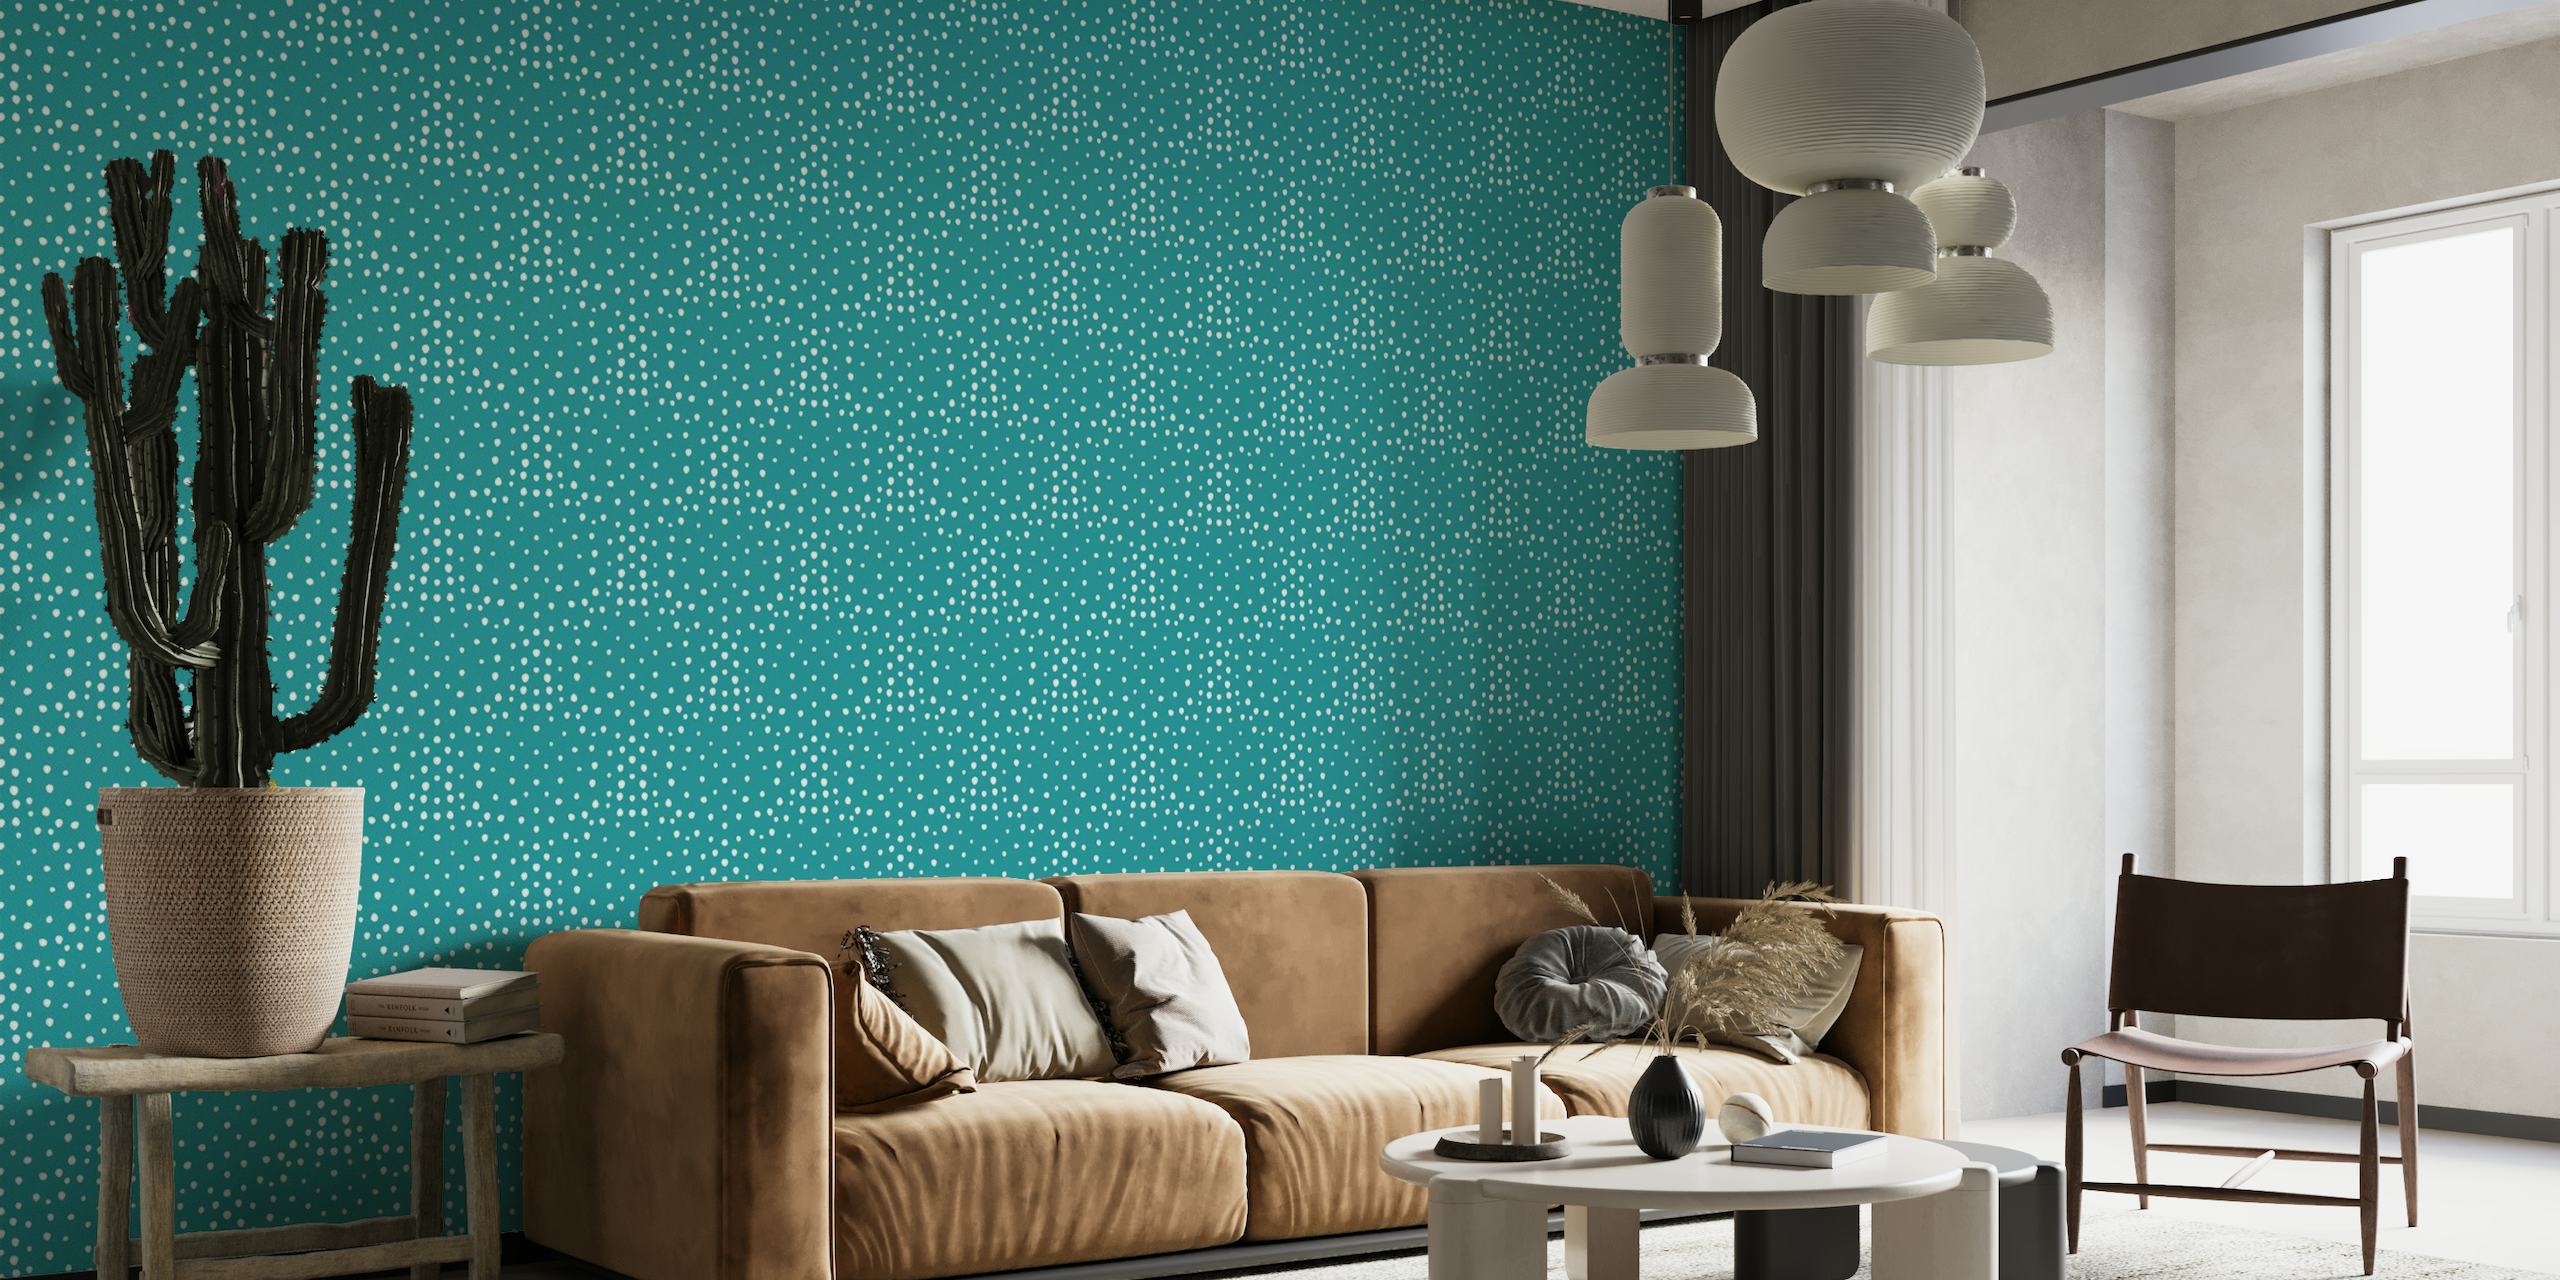 Turquoise Tranquility: Abstract Dots Blender Design - GD23-A17 tapete